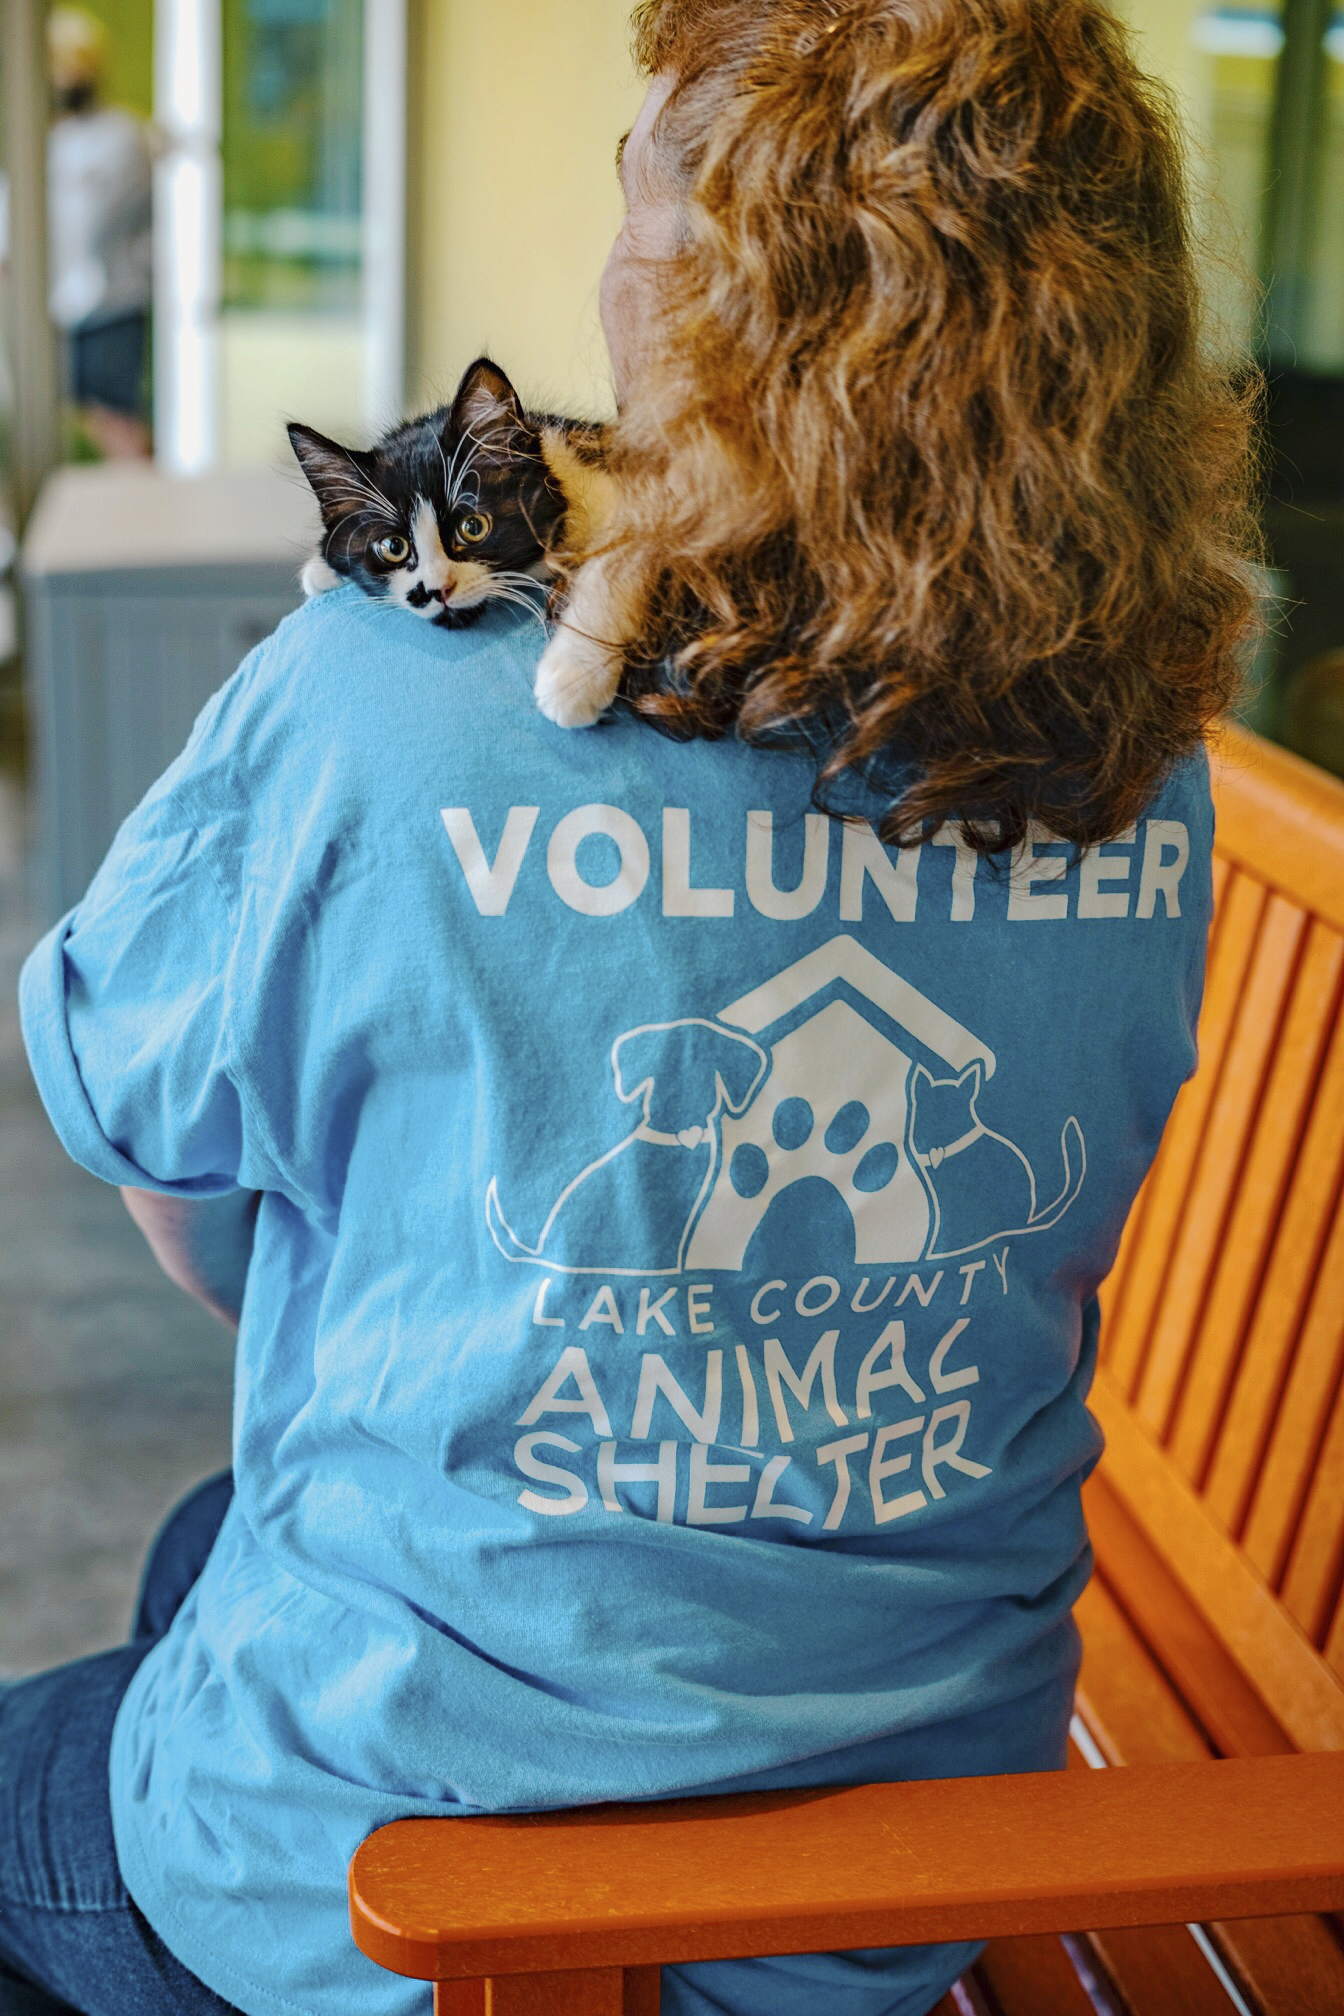 Volunteer with Lake County Animal Shelter